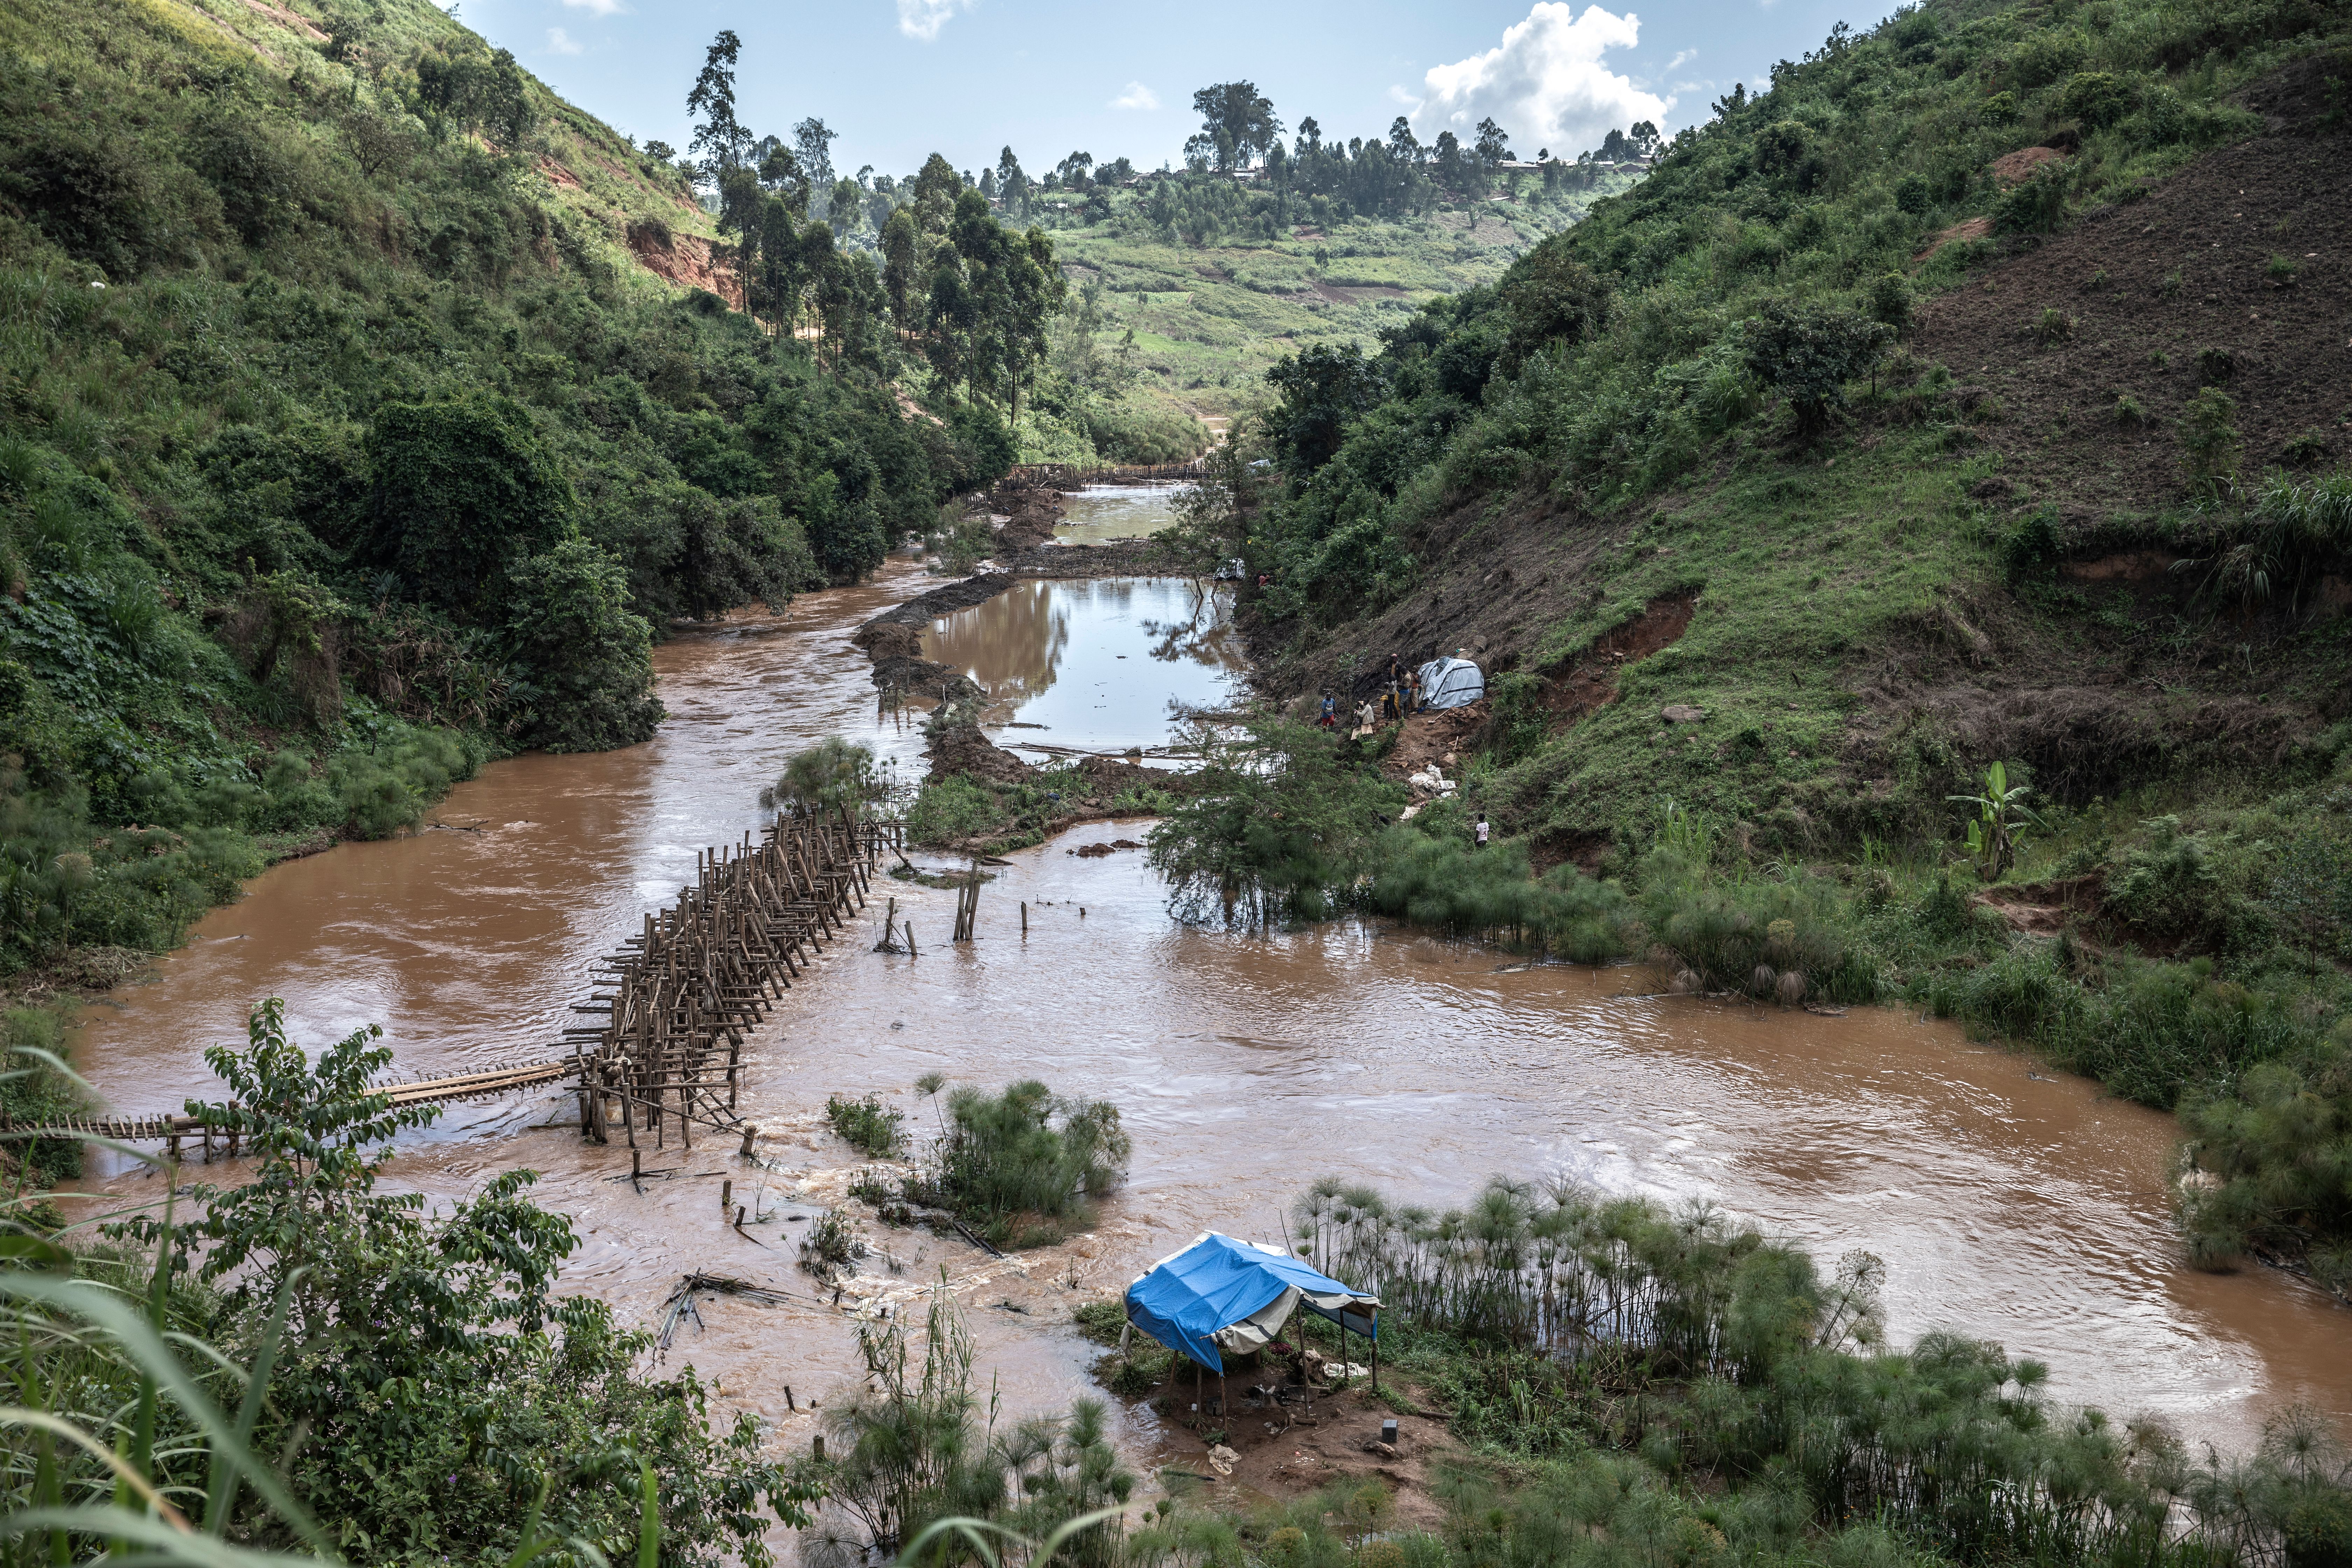 Iga Barrière, Ituri Province, May 2021. A diverted riverbank gold mine after heavy rain led to the mine being flooded overnight in Iga Barrière in Congo's Ituri province. Congo’s miners face plenty of risks excavating gold – 50 mostly young people died in a mine collapse last September – while health care and education for children is virtually non-existent. The coronavirus pandemic pushed up the global gold price to its highest value ever last August ($2,048 an ounce). Meanwhile, local prices offered from buyers in Africa went down, reflecting the imbalance in an international supply chain that exploits poor workers at the source of wealth. Hundreds of thousands of Congolese, including women and children, work in the informal mining sector, mostly in gold. Artisanal subsistence mining is the informal, small-scale mining done independently by people not officially employed by a mining company, using their own resources, usually by hand.